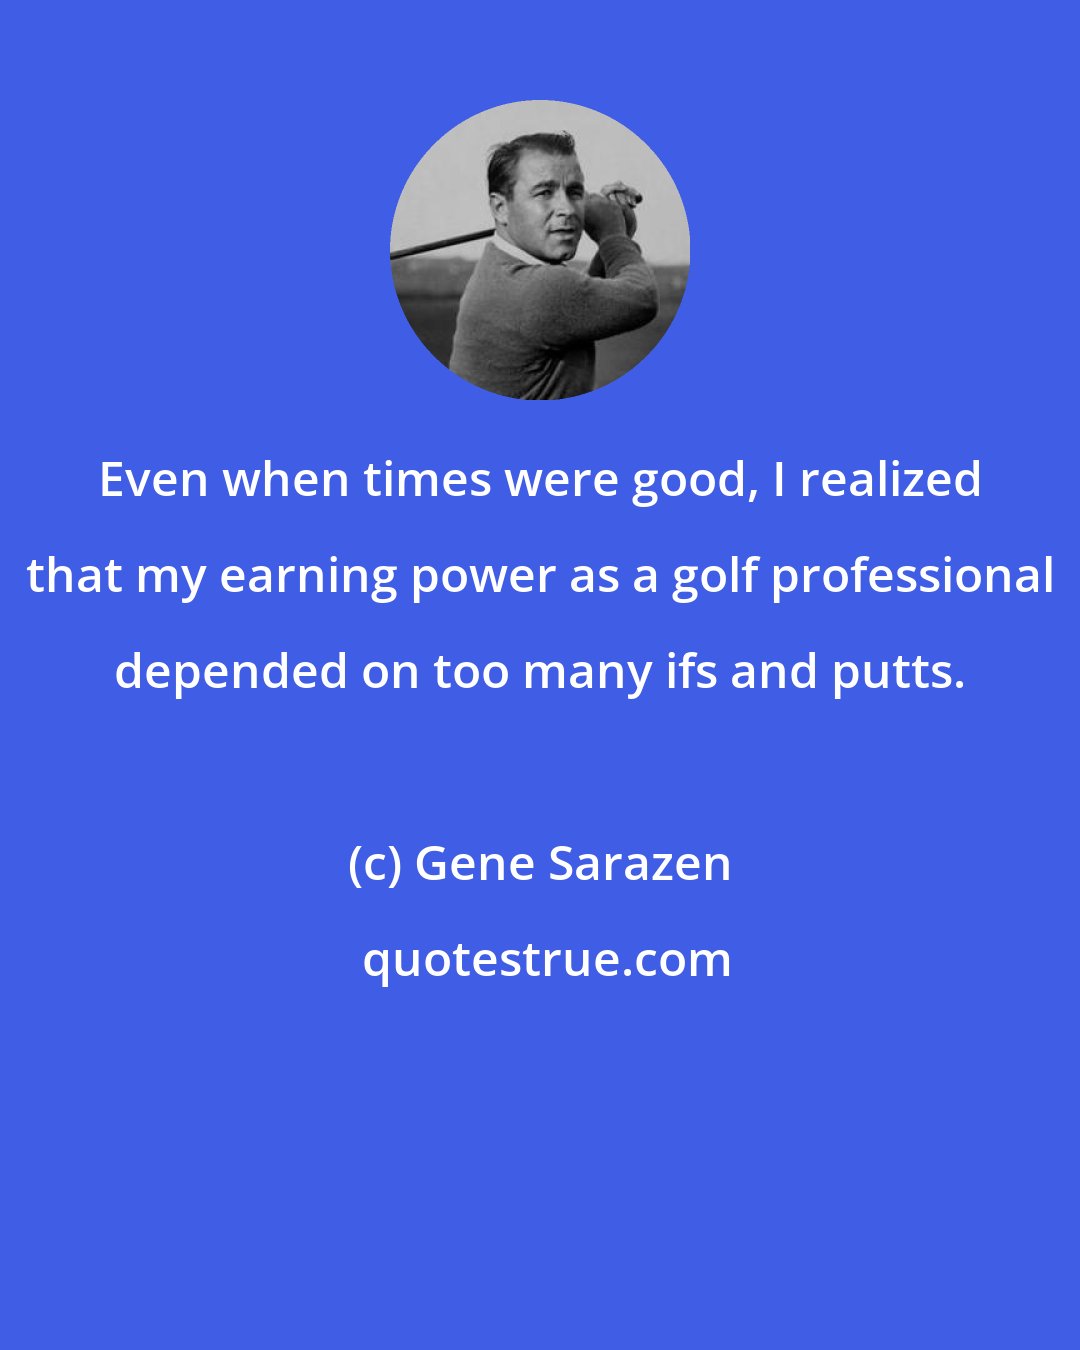 Gene Sarazen: Even when times were good, I realized that my earning power as a golf professional depended on too many ifs and putts.